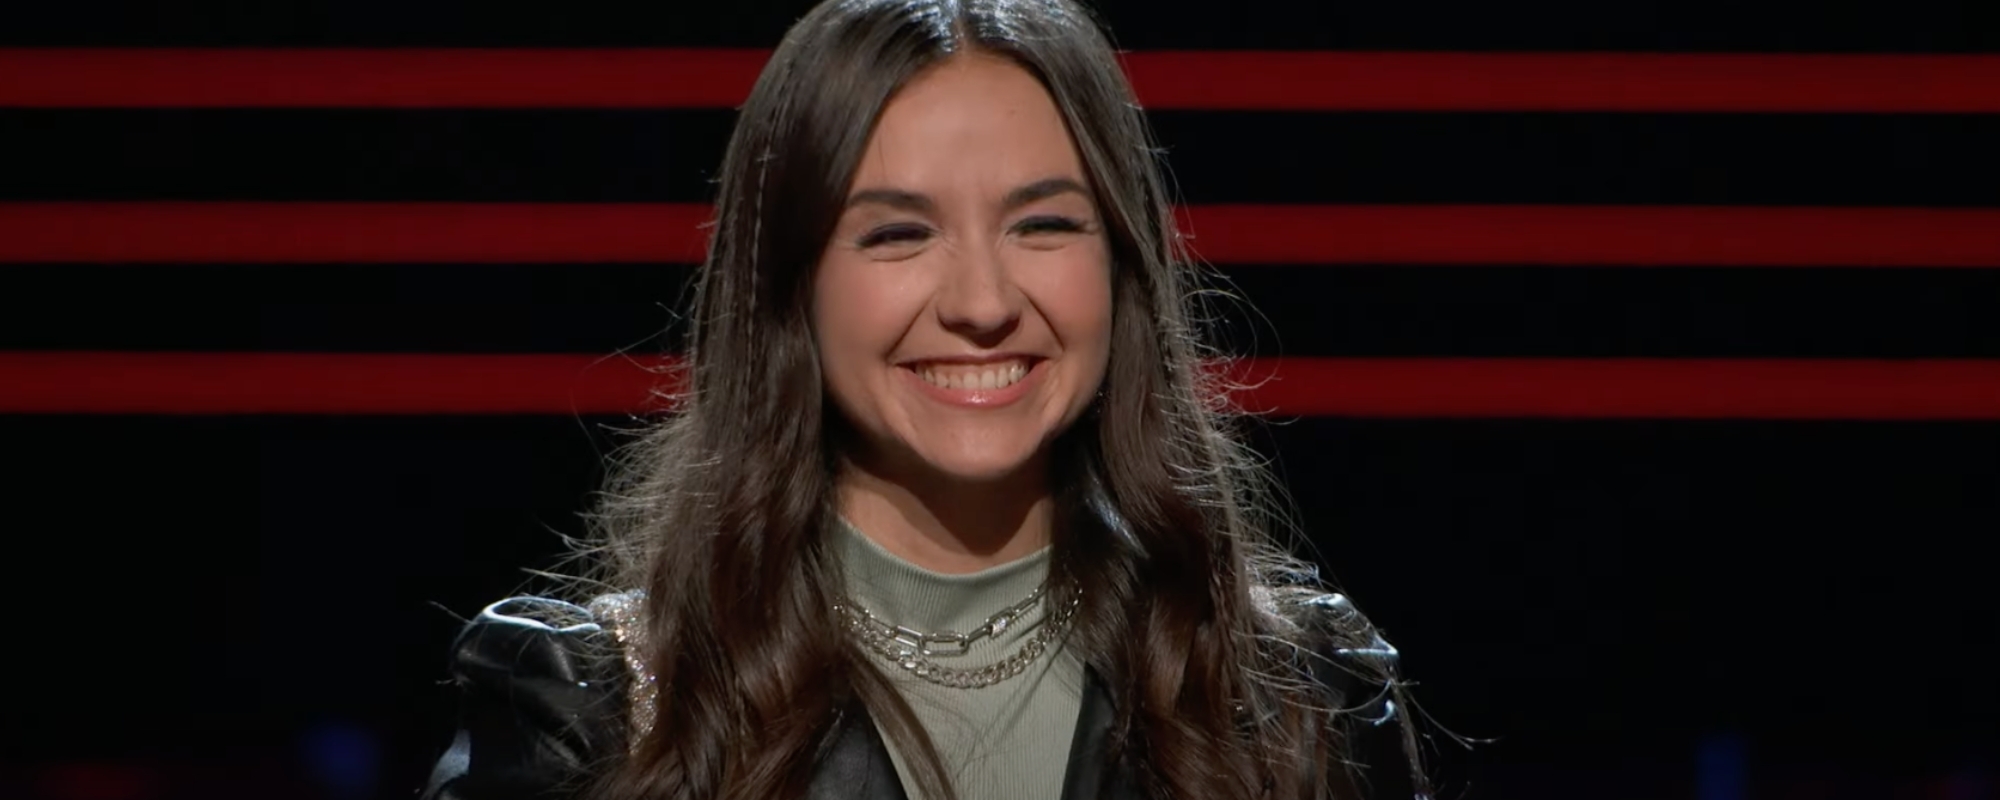 ‘The Voice’ Maddi Jane Receives Four-Chair Turn With Epic “Escapism” Cover